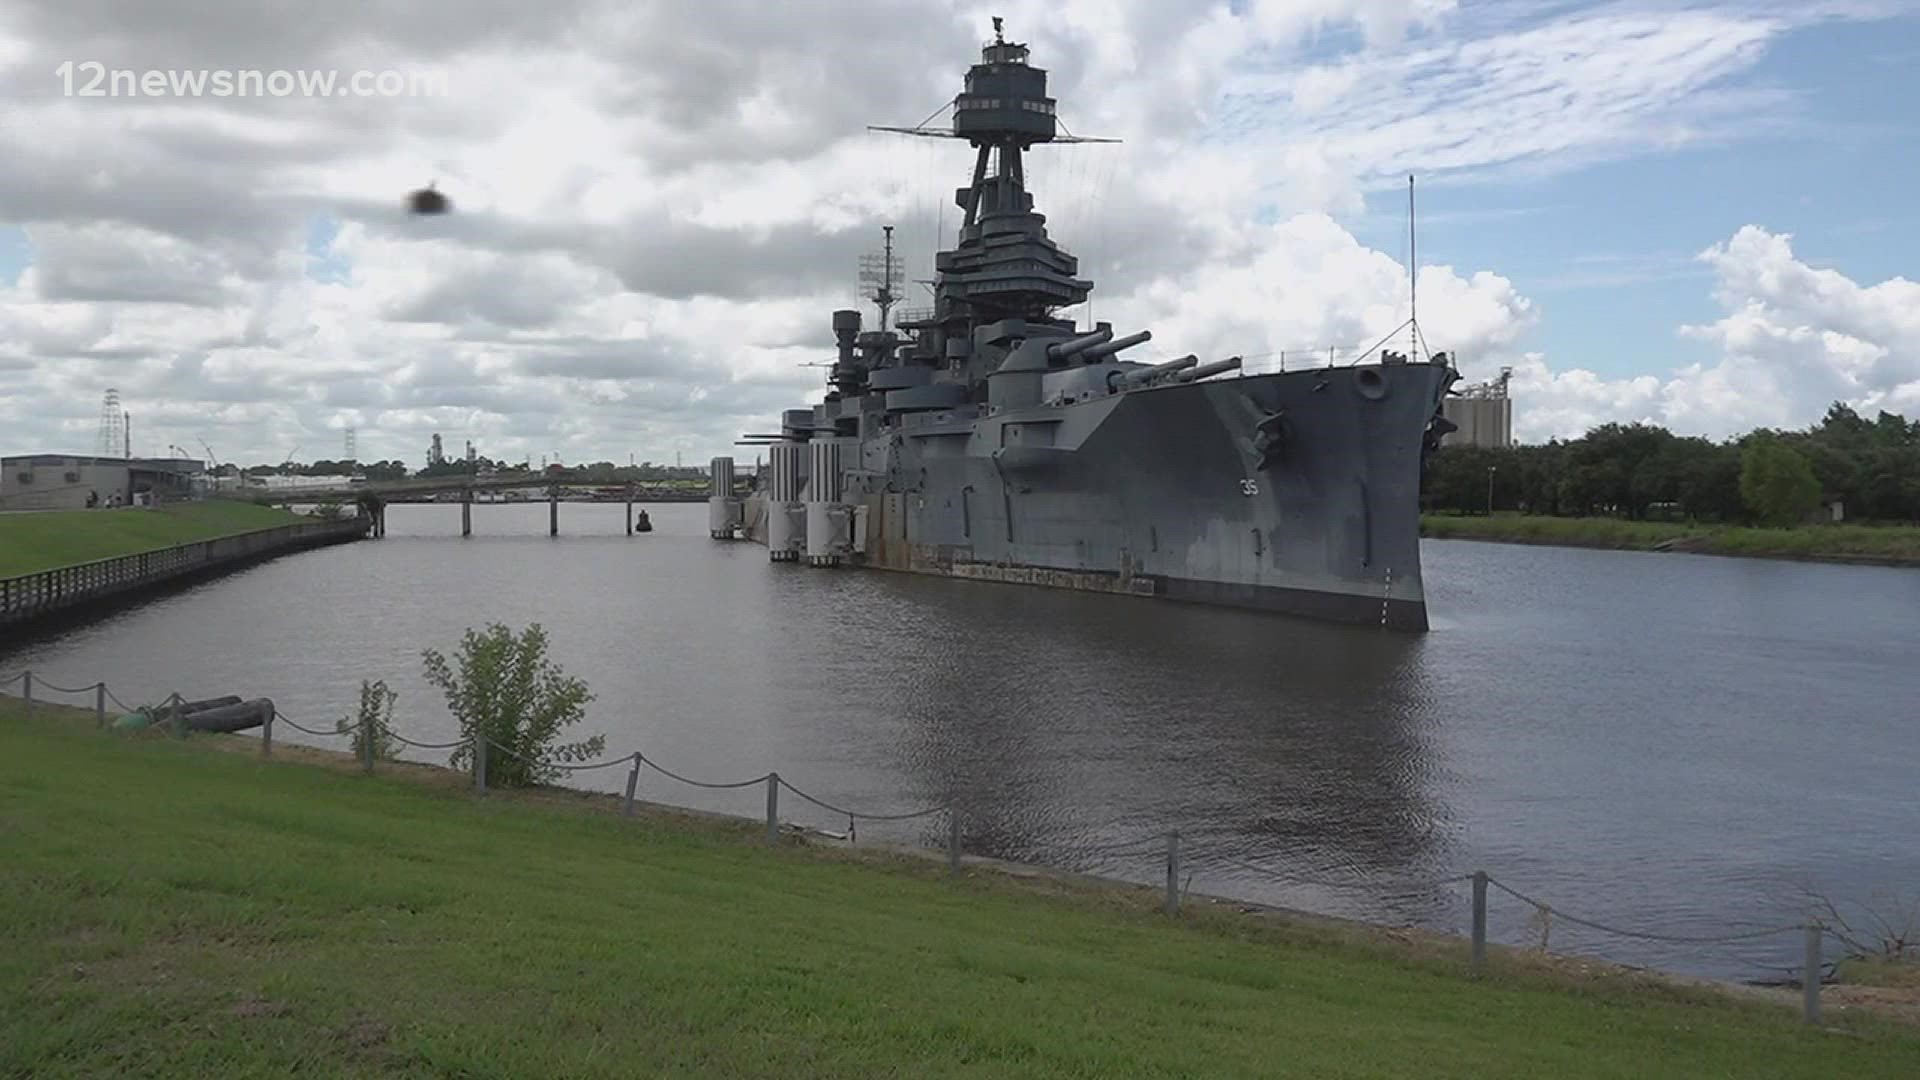 Representatives from the battleship Texas foundation attended Tuesday’s Beaumont City Council meeting to talk about the potential move.